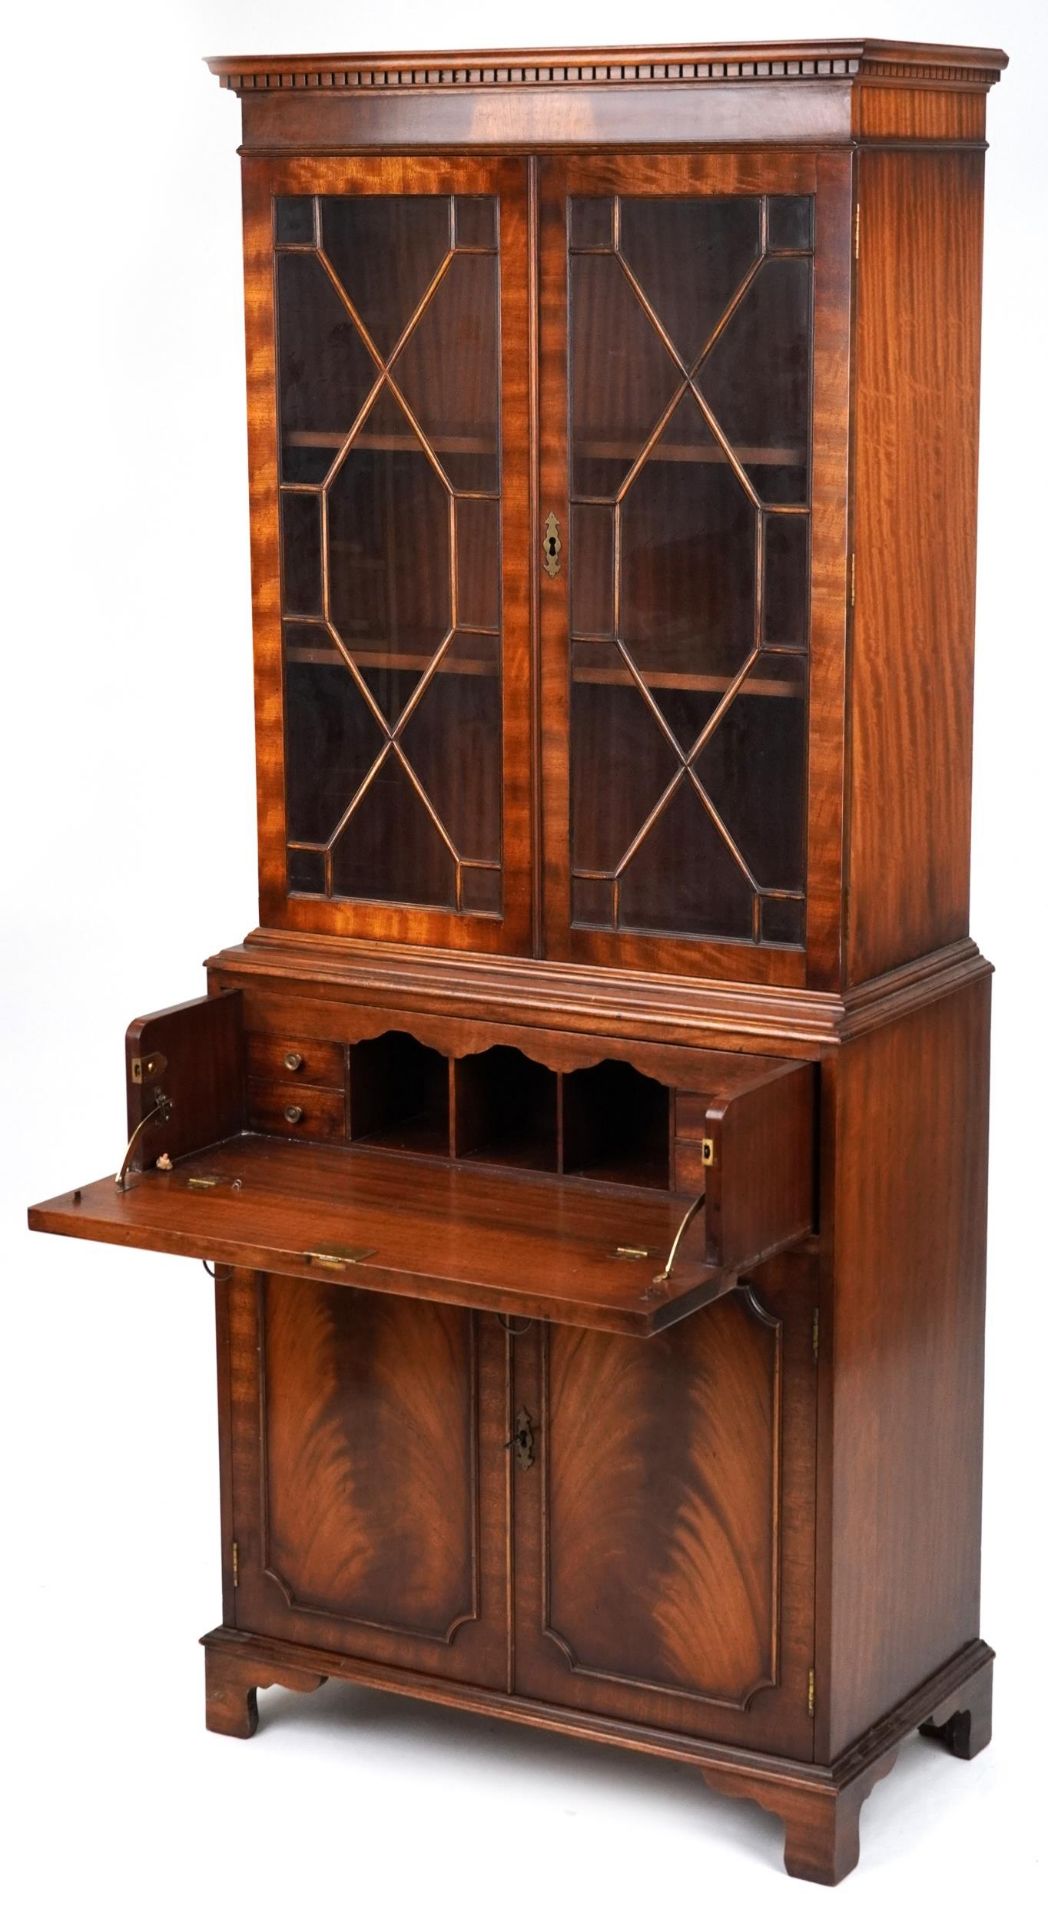 Georgian style mahogany secretaire bookcase with astral glazed doors above a fall enclosing